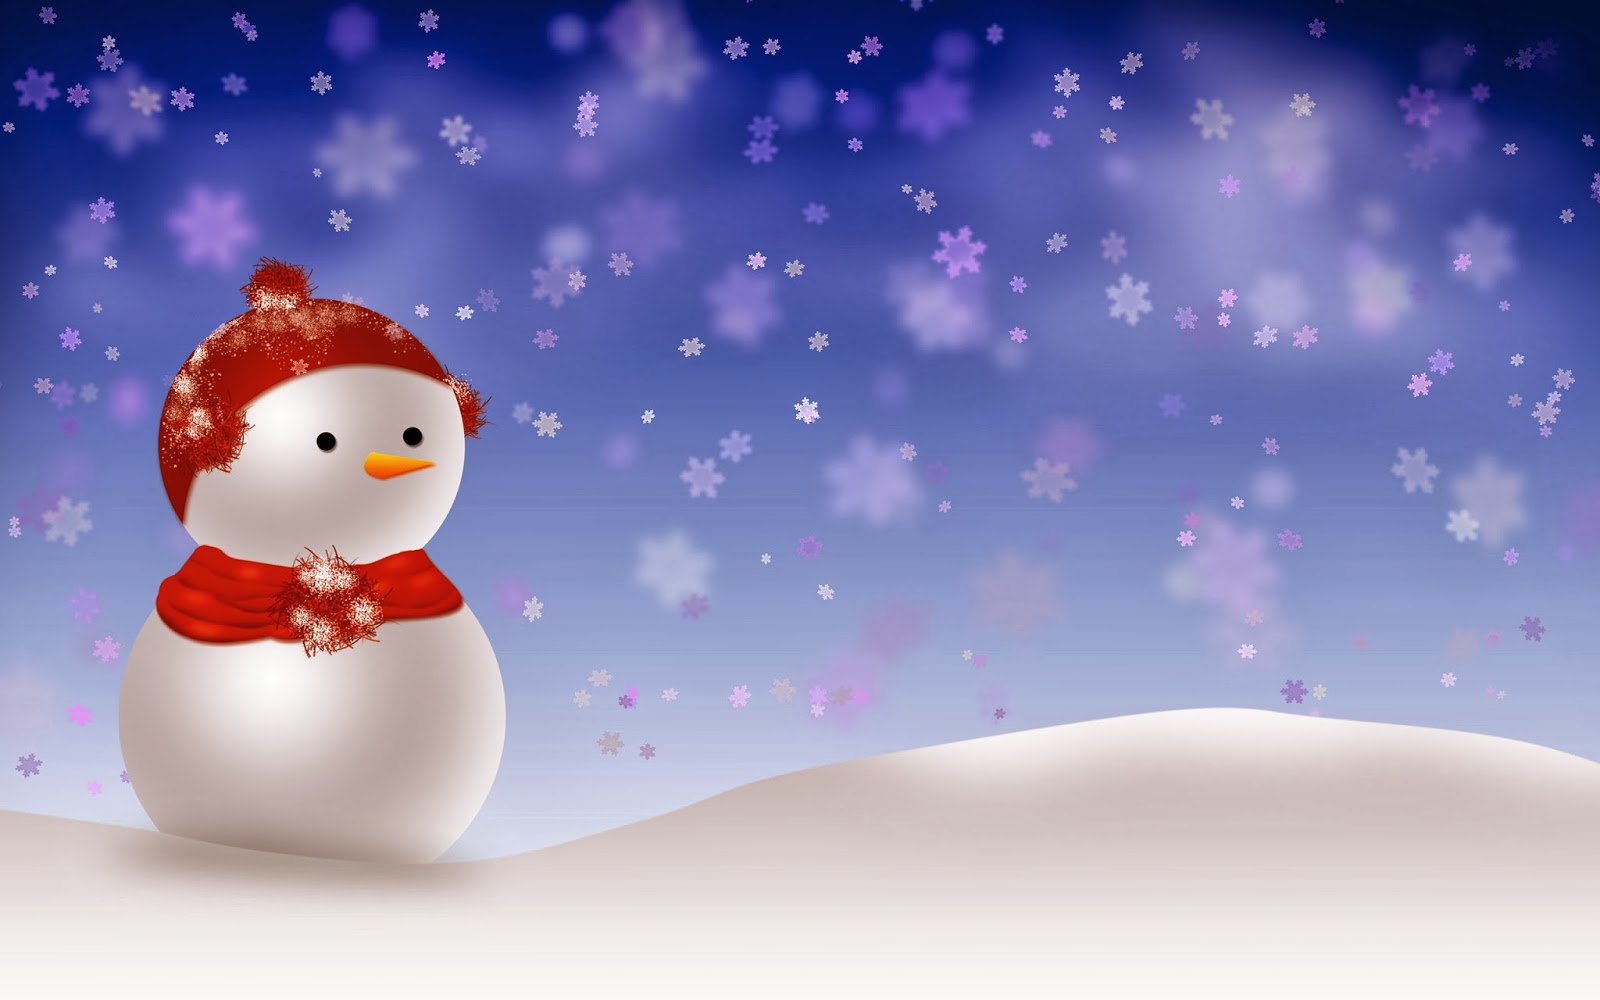 Wallpaper For S Snowman Widescreen Pictures And